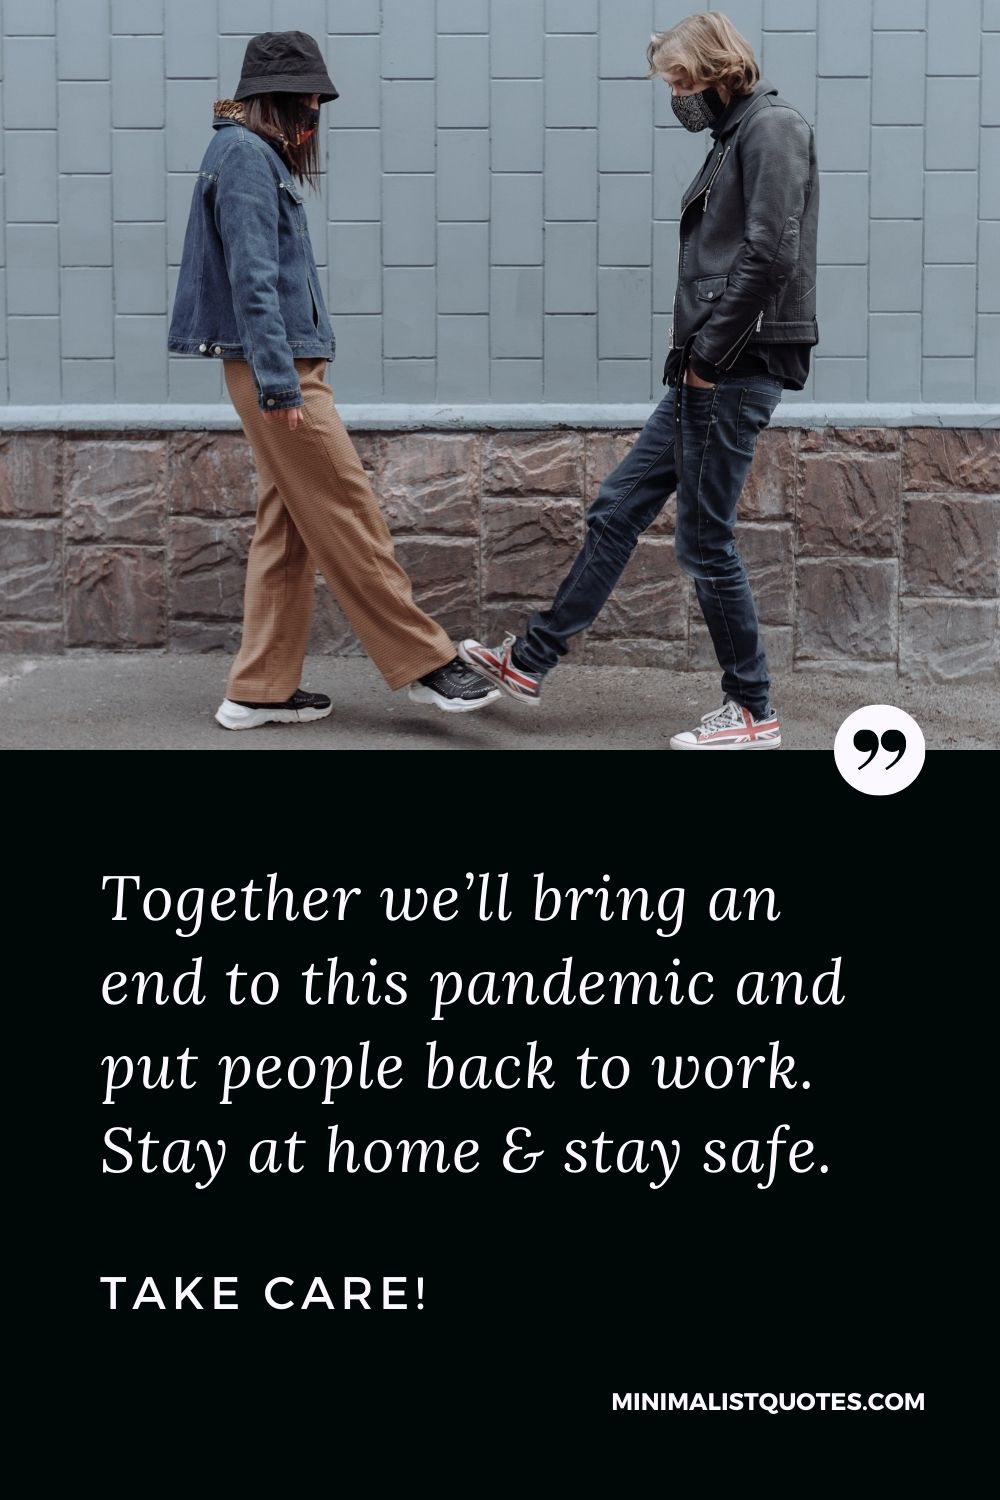 Quarantine Birthday Quote, Wish & Message With Image: Together we’ll bring an end to this pandemic and put people back to work. Stay at home & stay safe. Take Care!